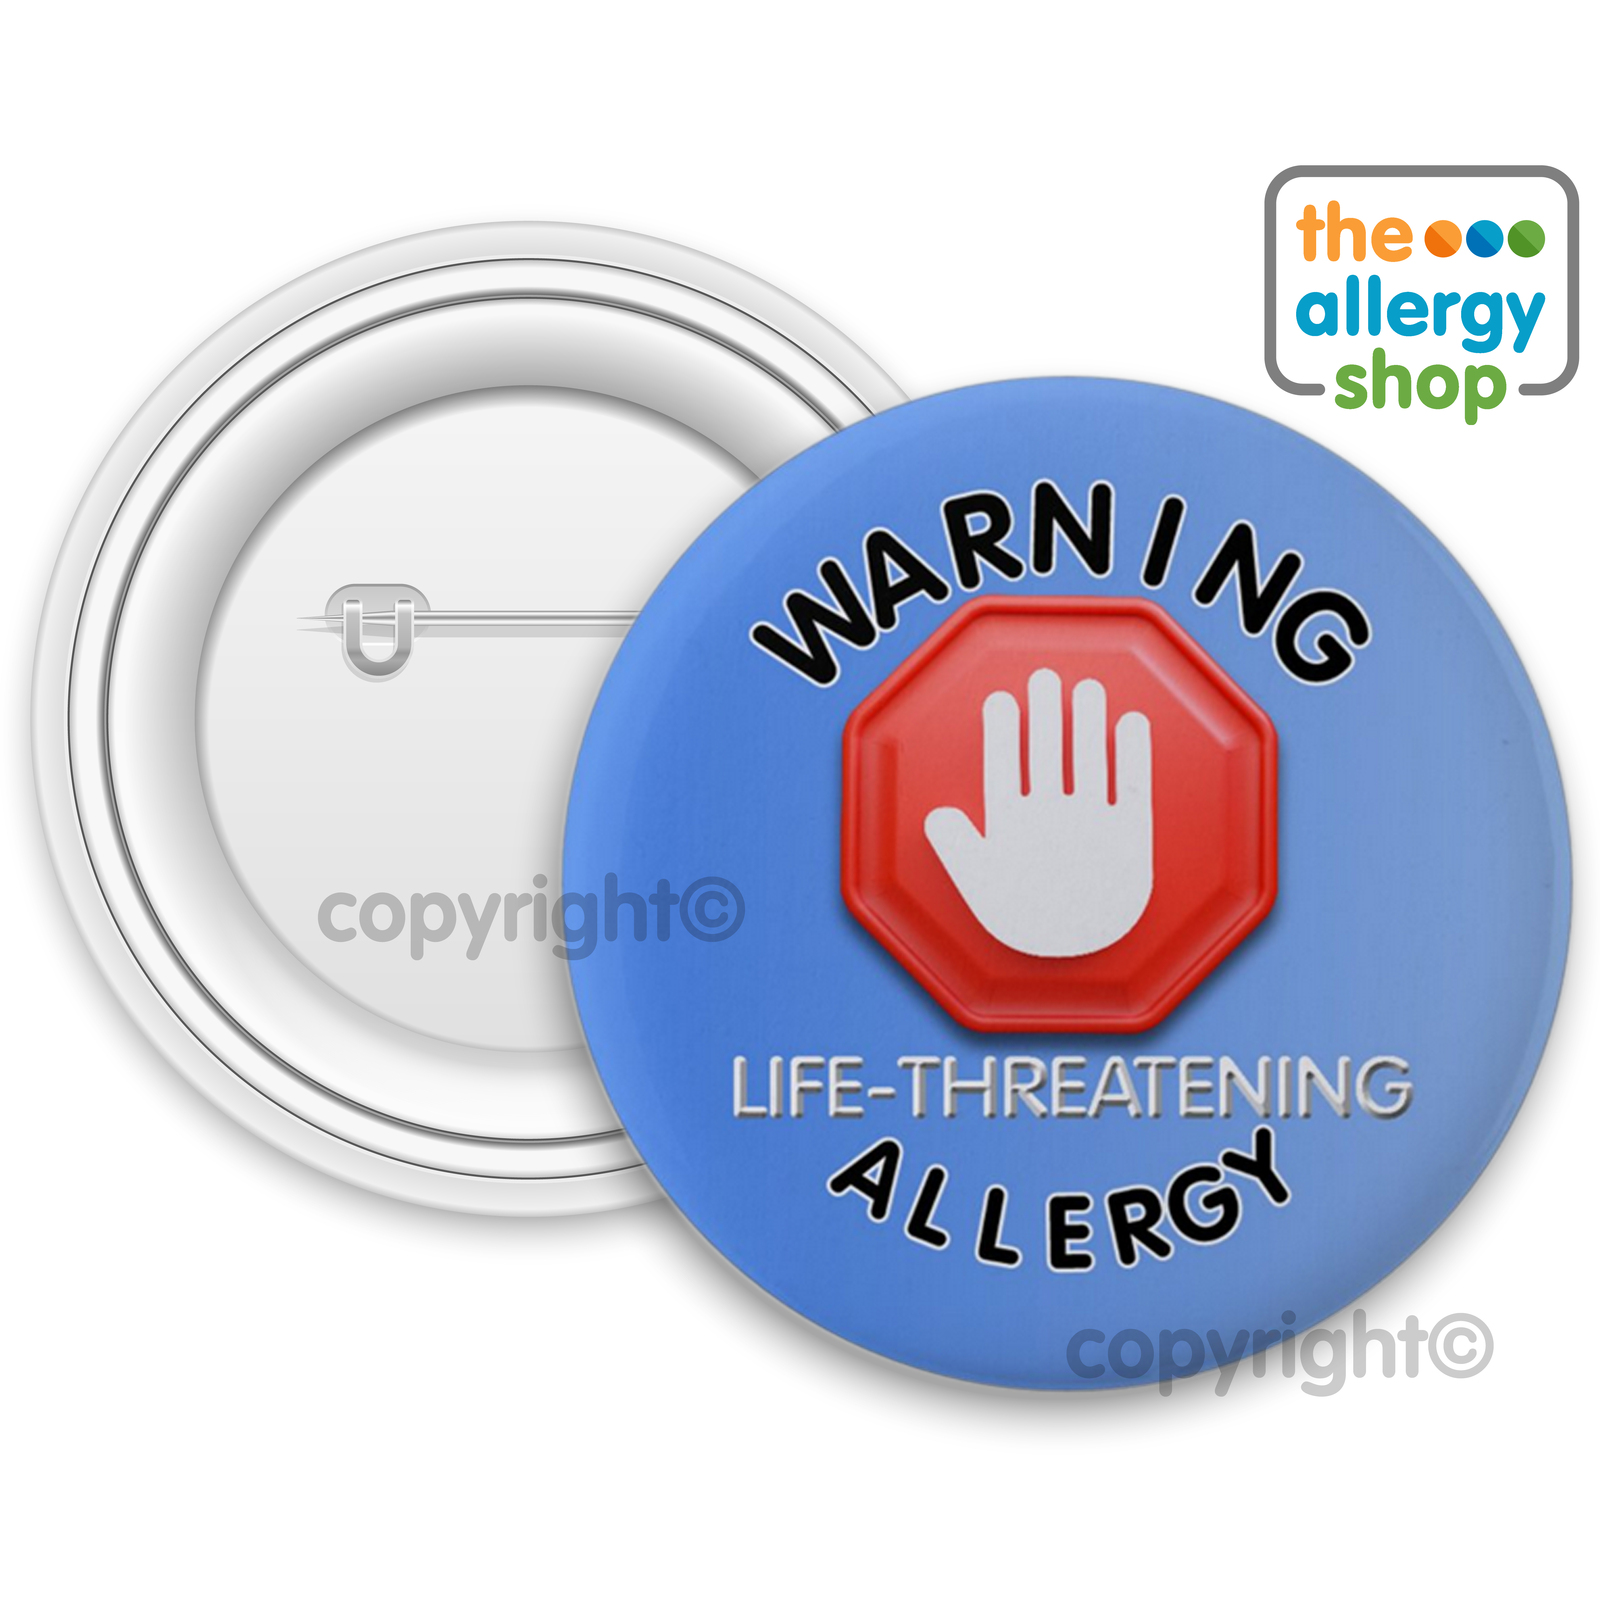 Allergy Alert and Warning Badges & Buttons for Your Safety and Peace of ...